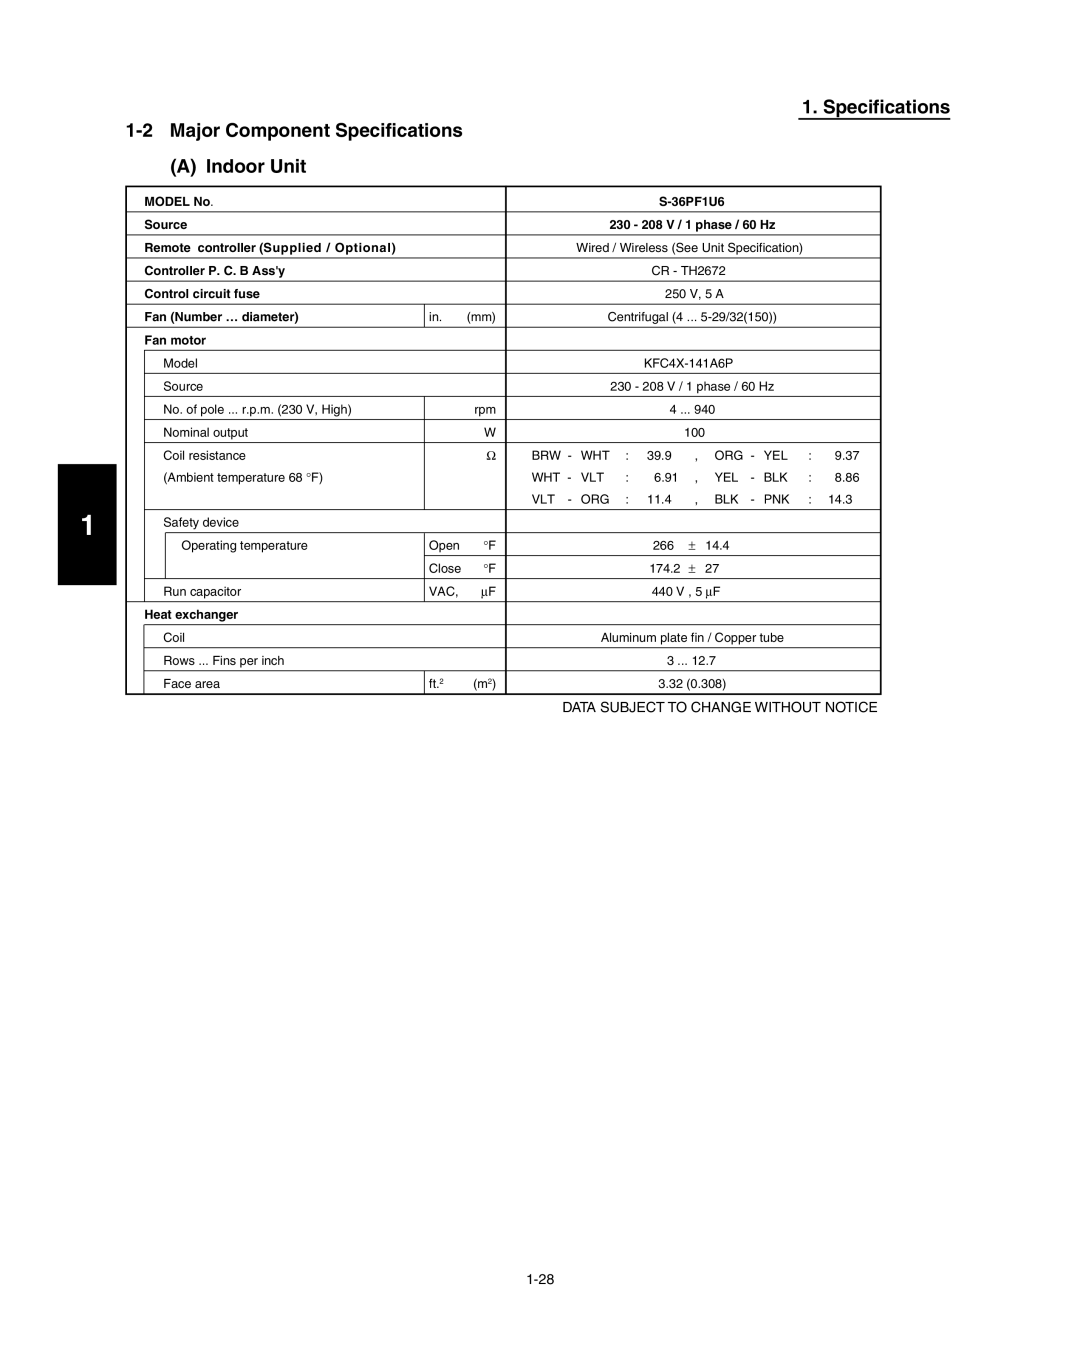 Panasonic R410A 1-2Major Component Specifications, A Indoor Unit, Data Subject To Change Without Notice, 1-28, Source 